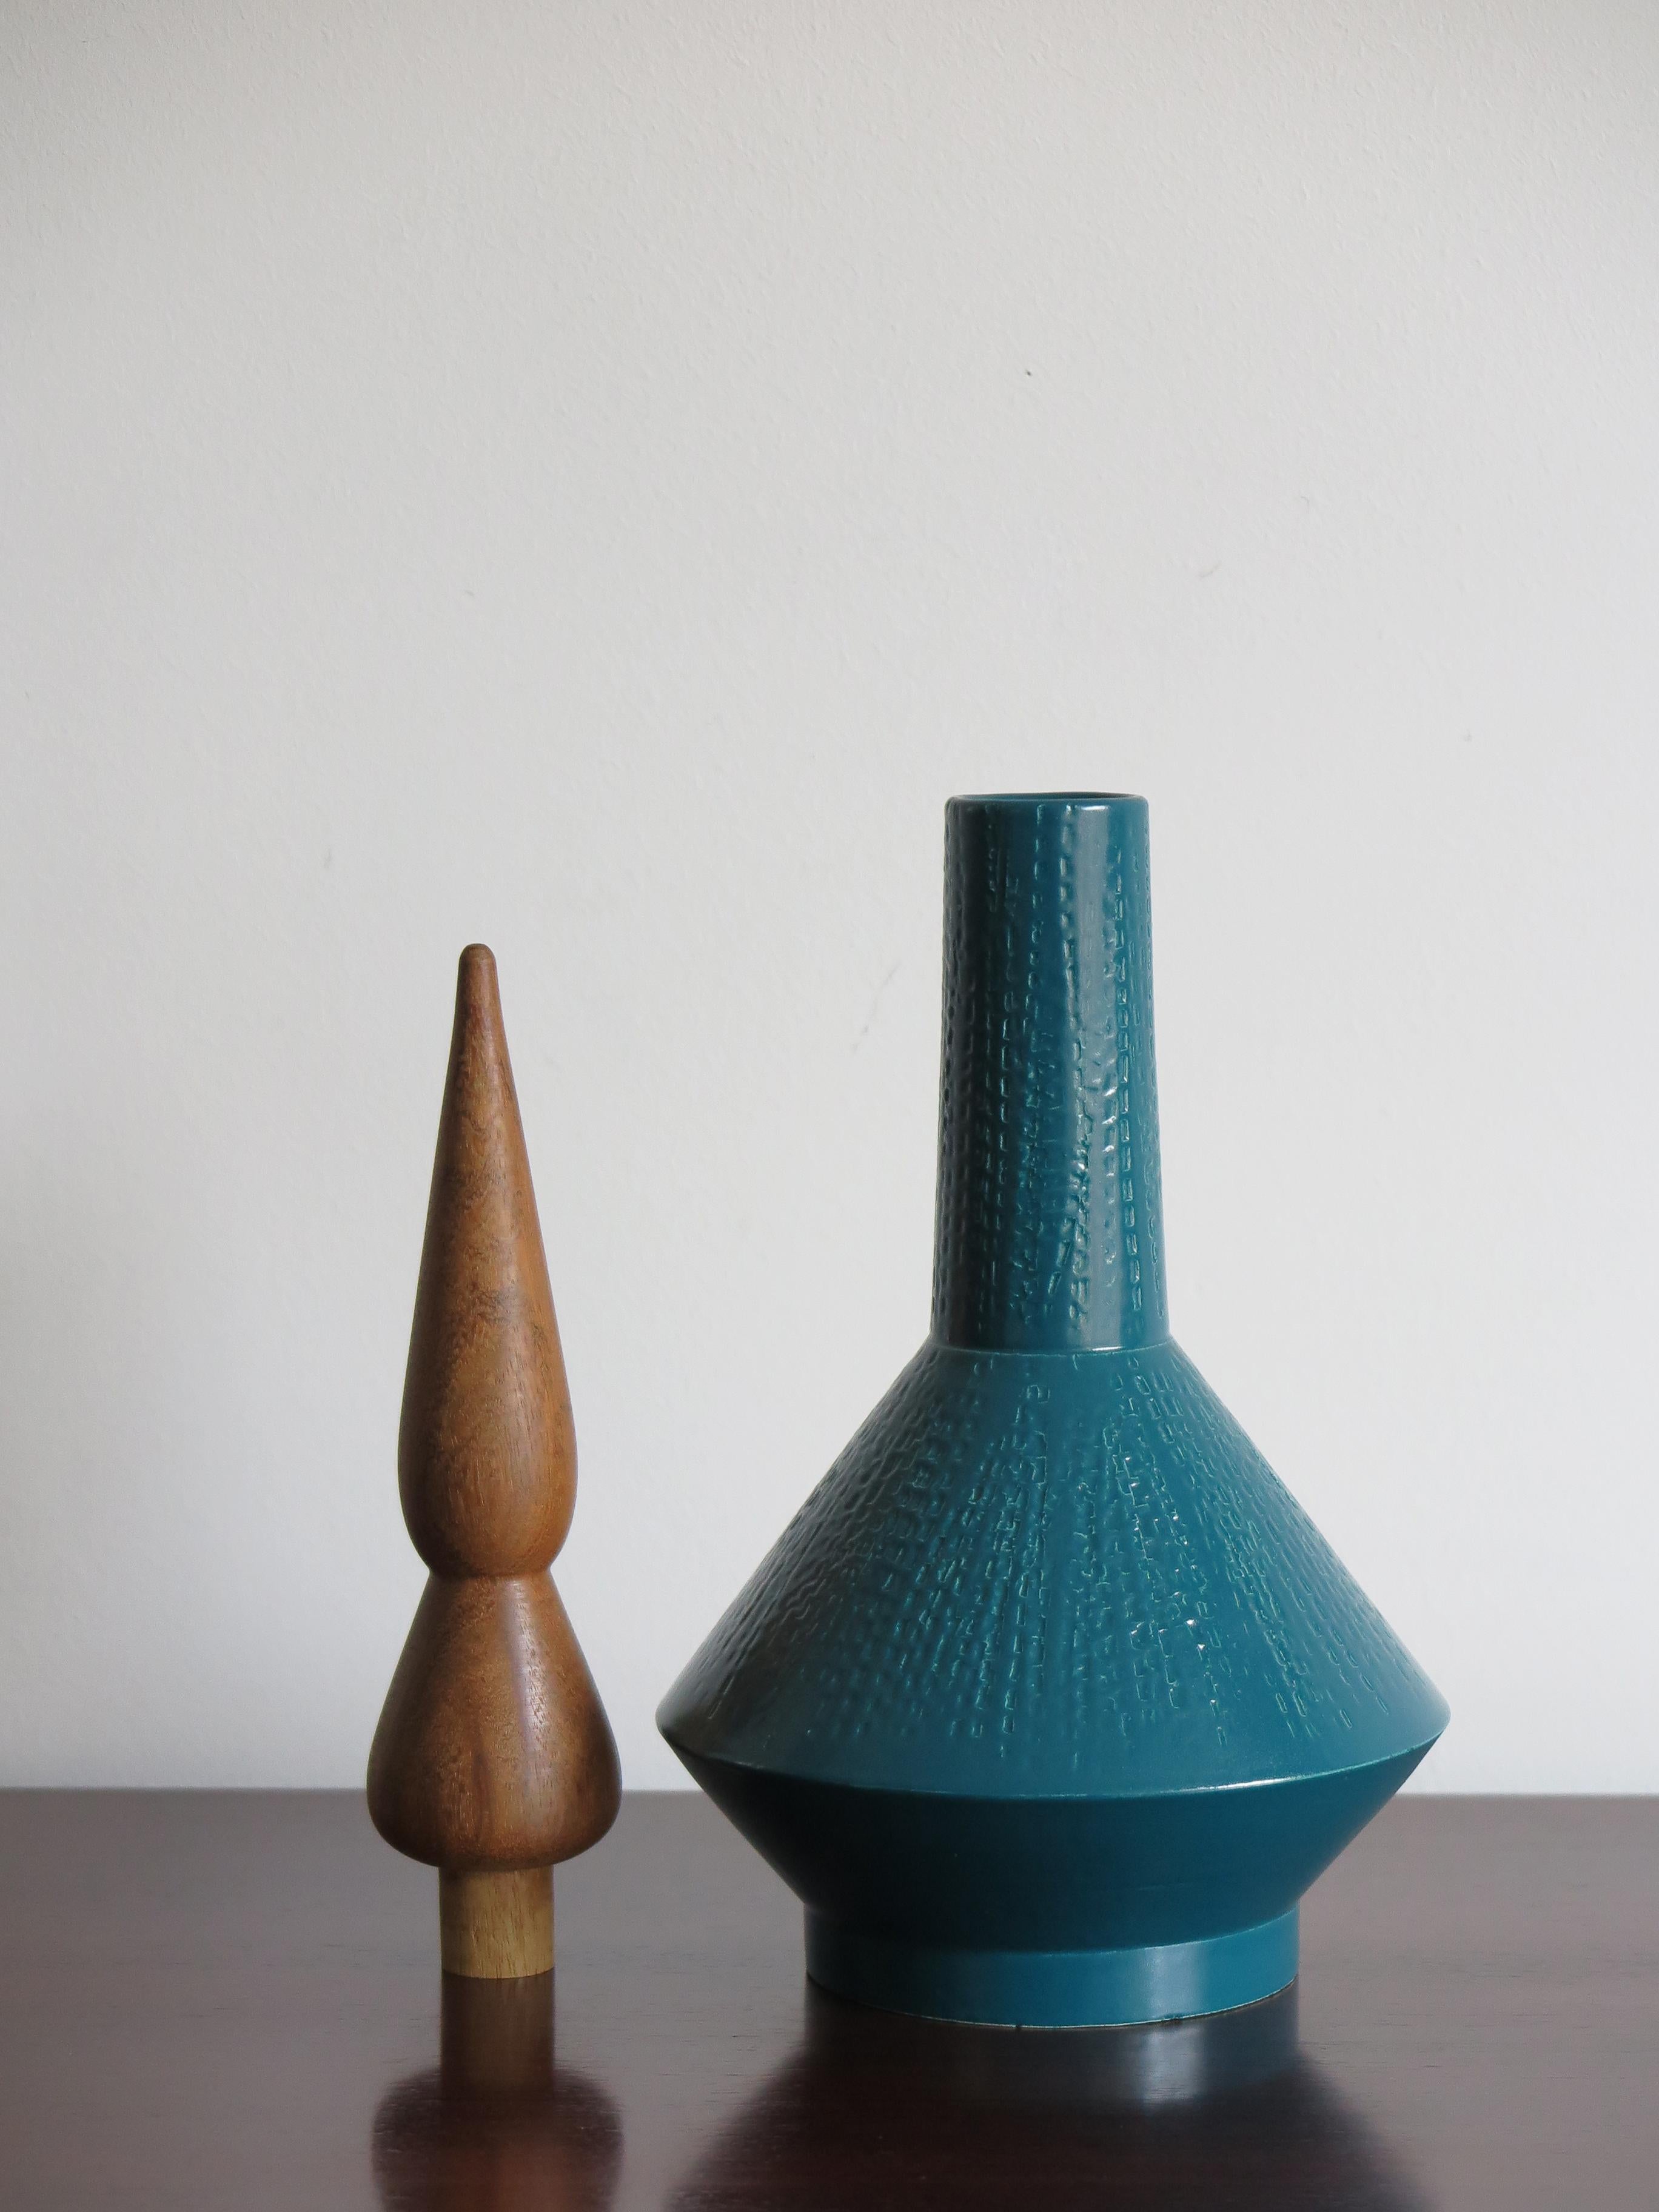 Contemporary Blue Green Ceramic Vases Designed by Capperidicasa, Made in Italy For Sale 4